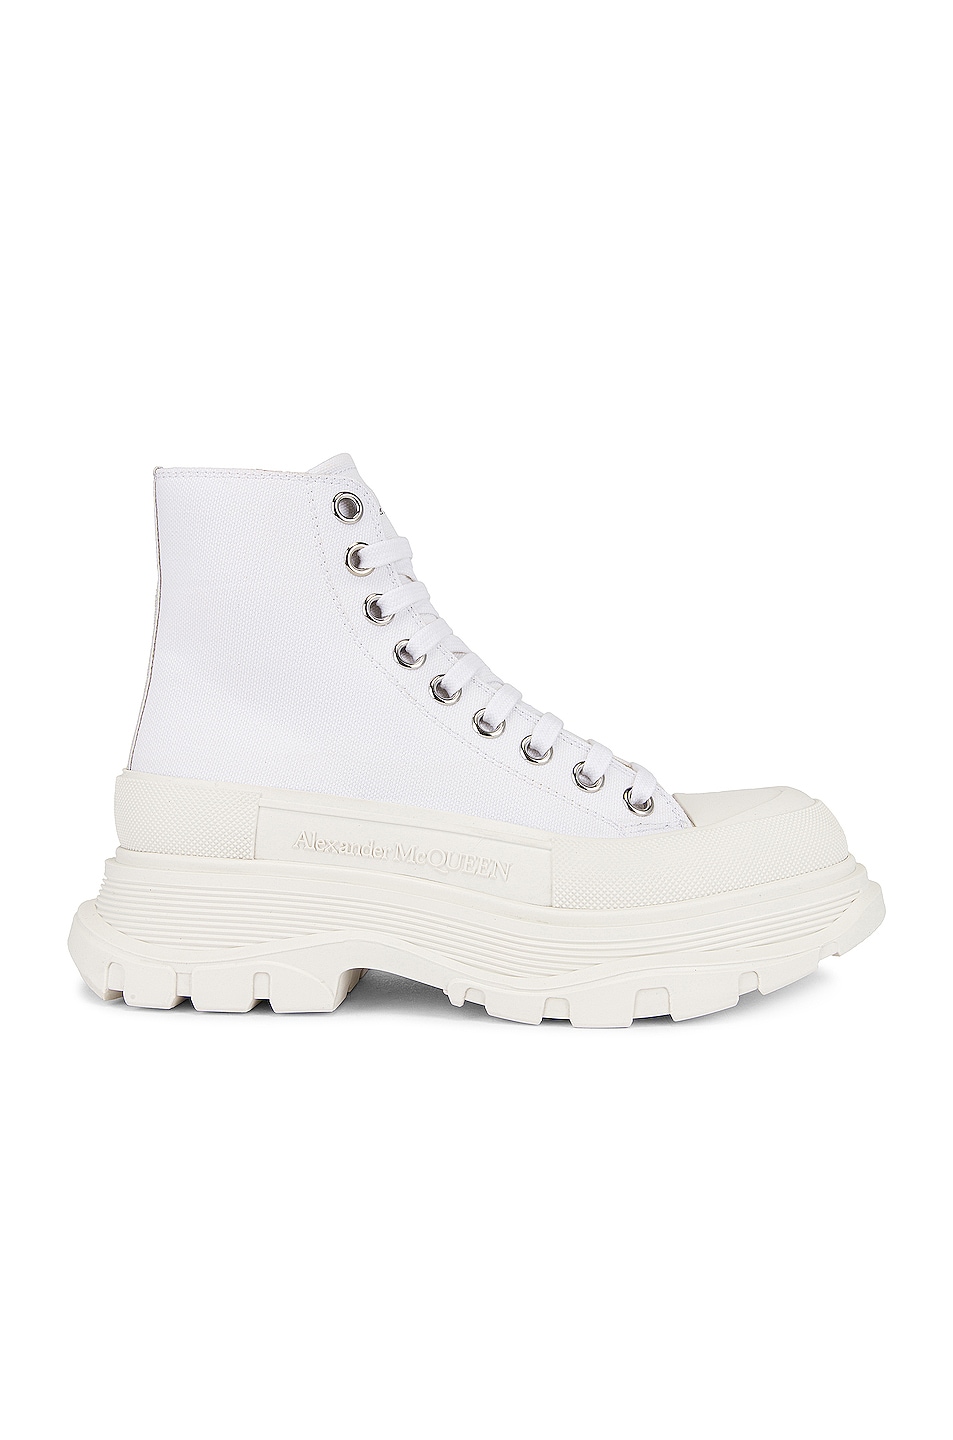 Image 1 of Alexander McQueen Tread Slick Boots in White & White